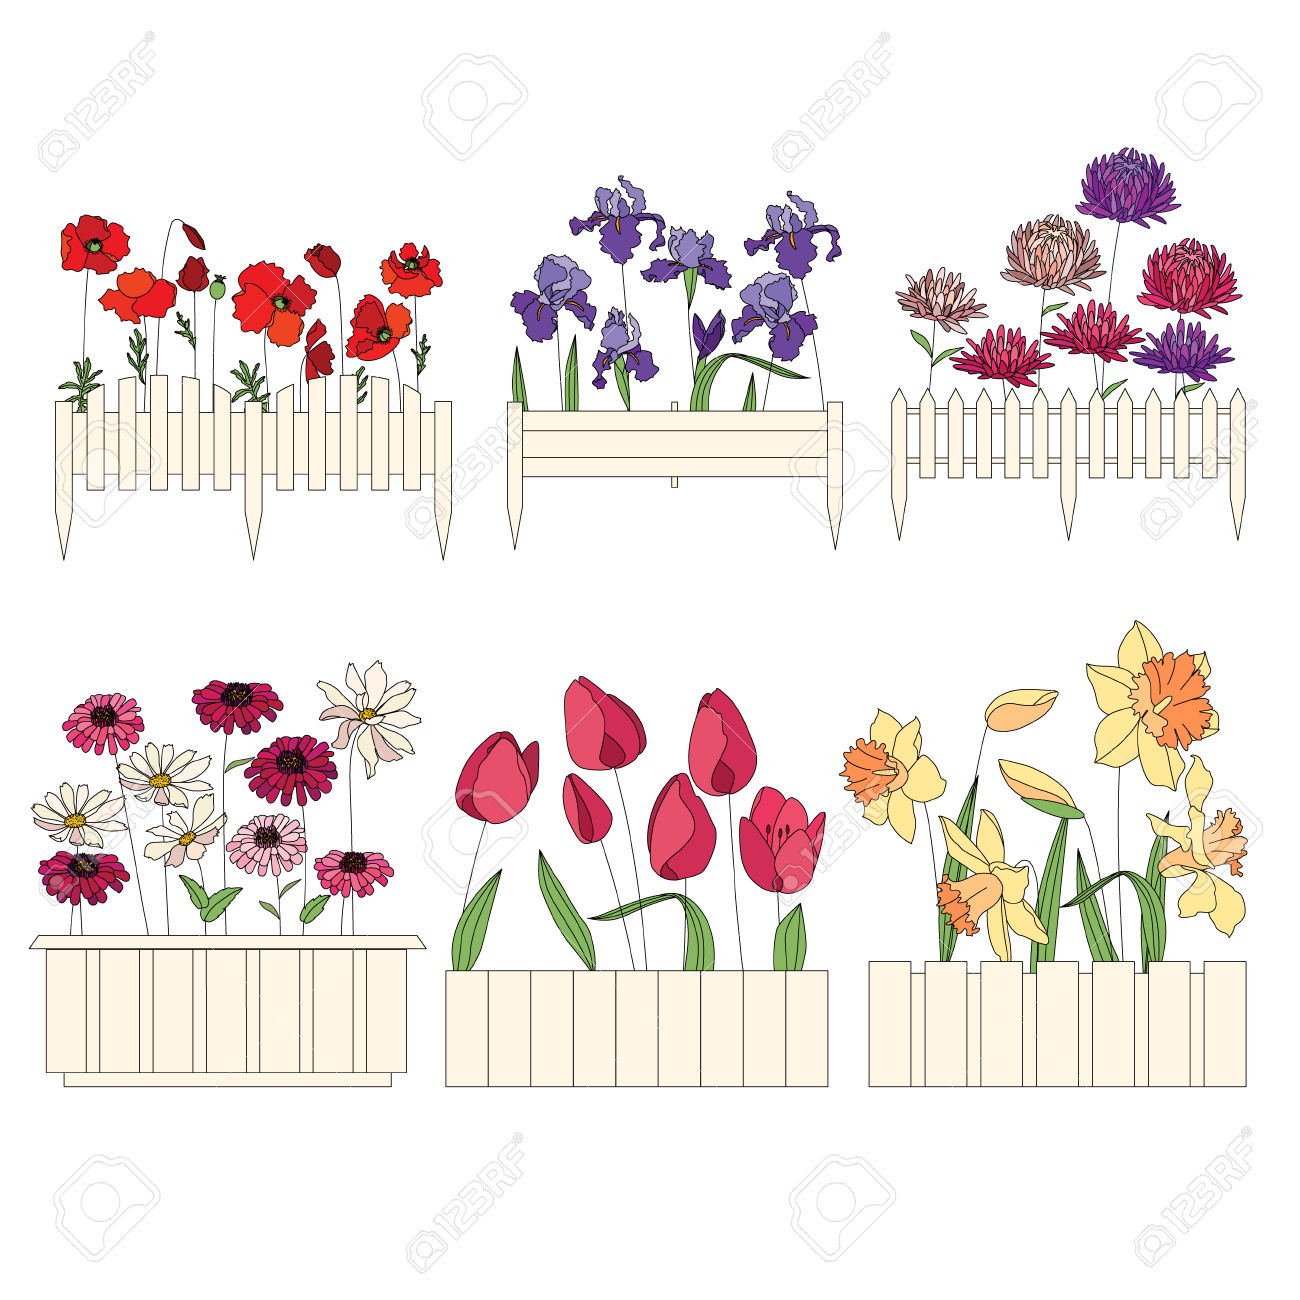 Flower Pots With Cultivated Flowers. Decorative Fence. Plants.